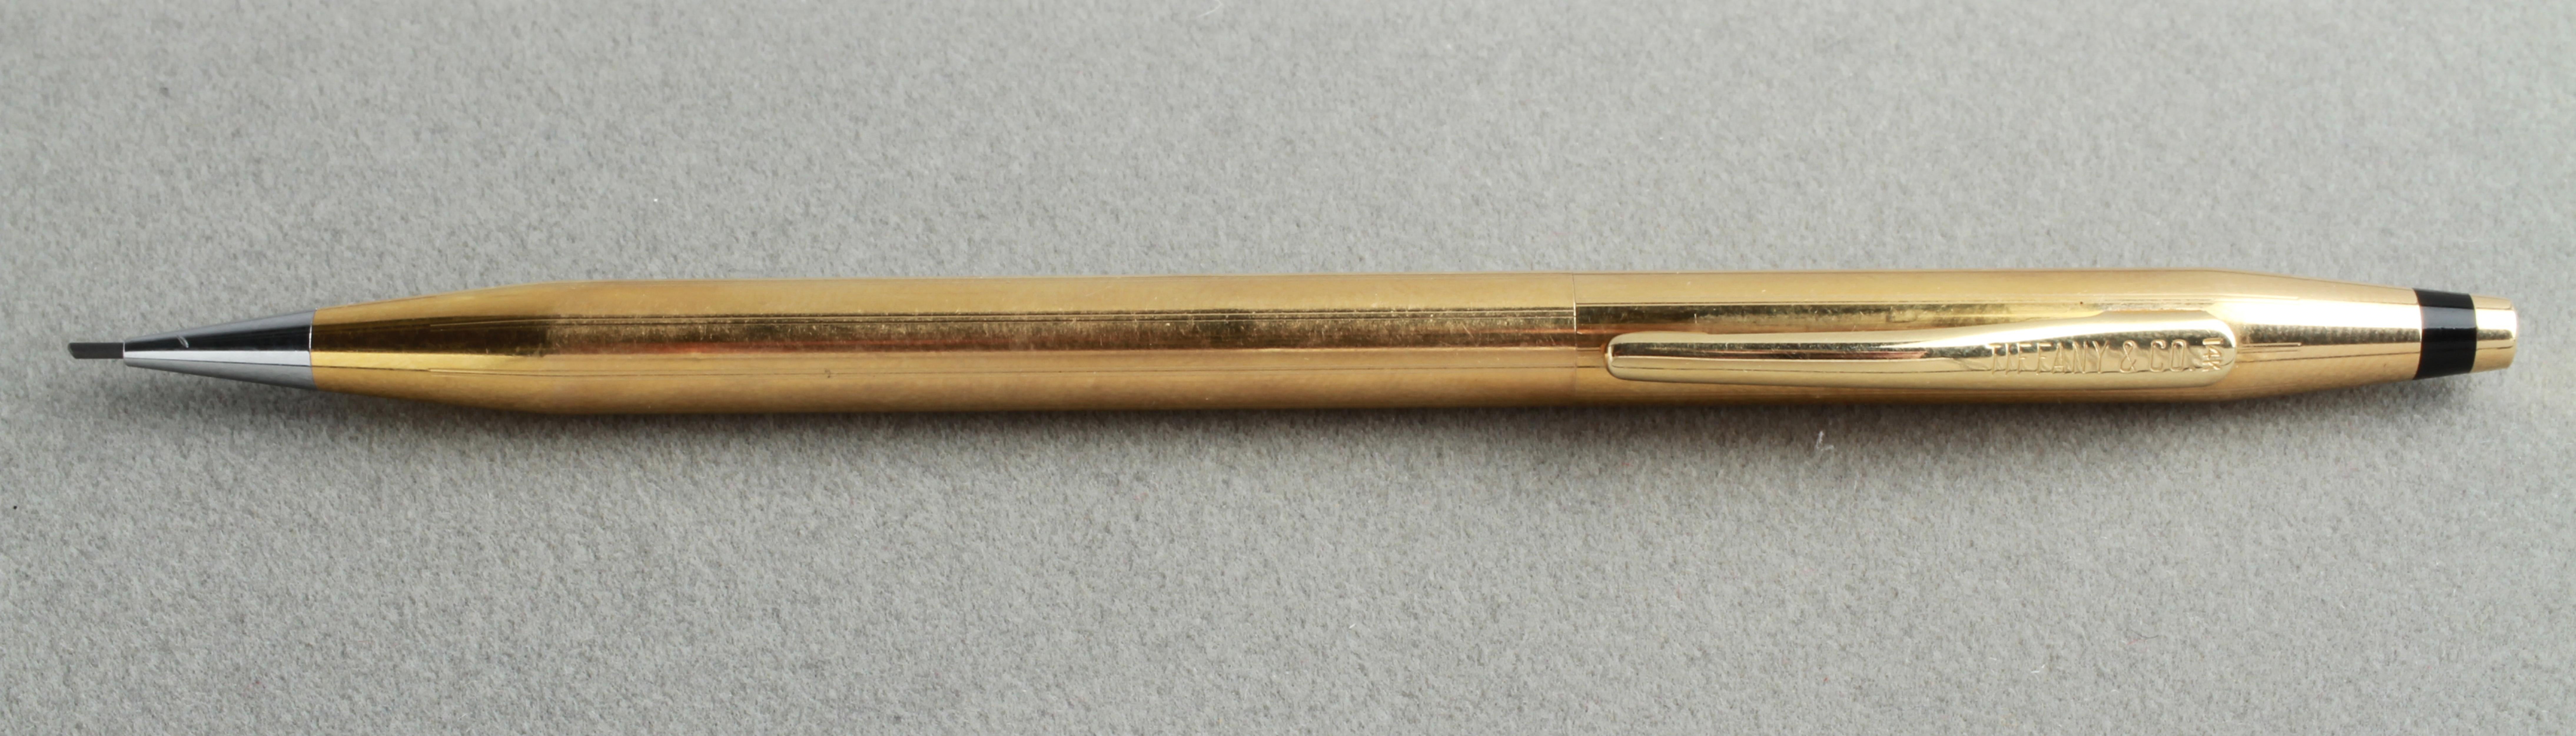 Modern mechanical pencil designed by Cross for Tiffany & Co. in 14-karat yellow gold. Approximately 13.8 dwt inclusive. The piece is in great vintage condition with age appropriate wear and a small dent. 
From the Estate of Elliott Lang.
  